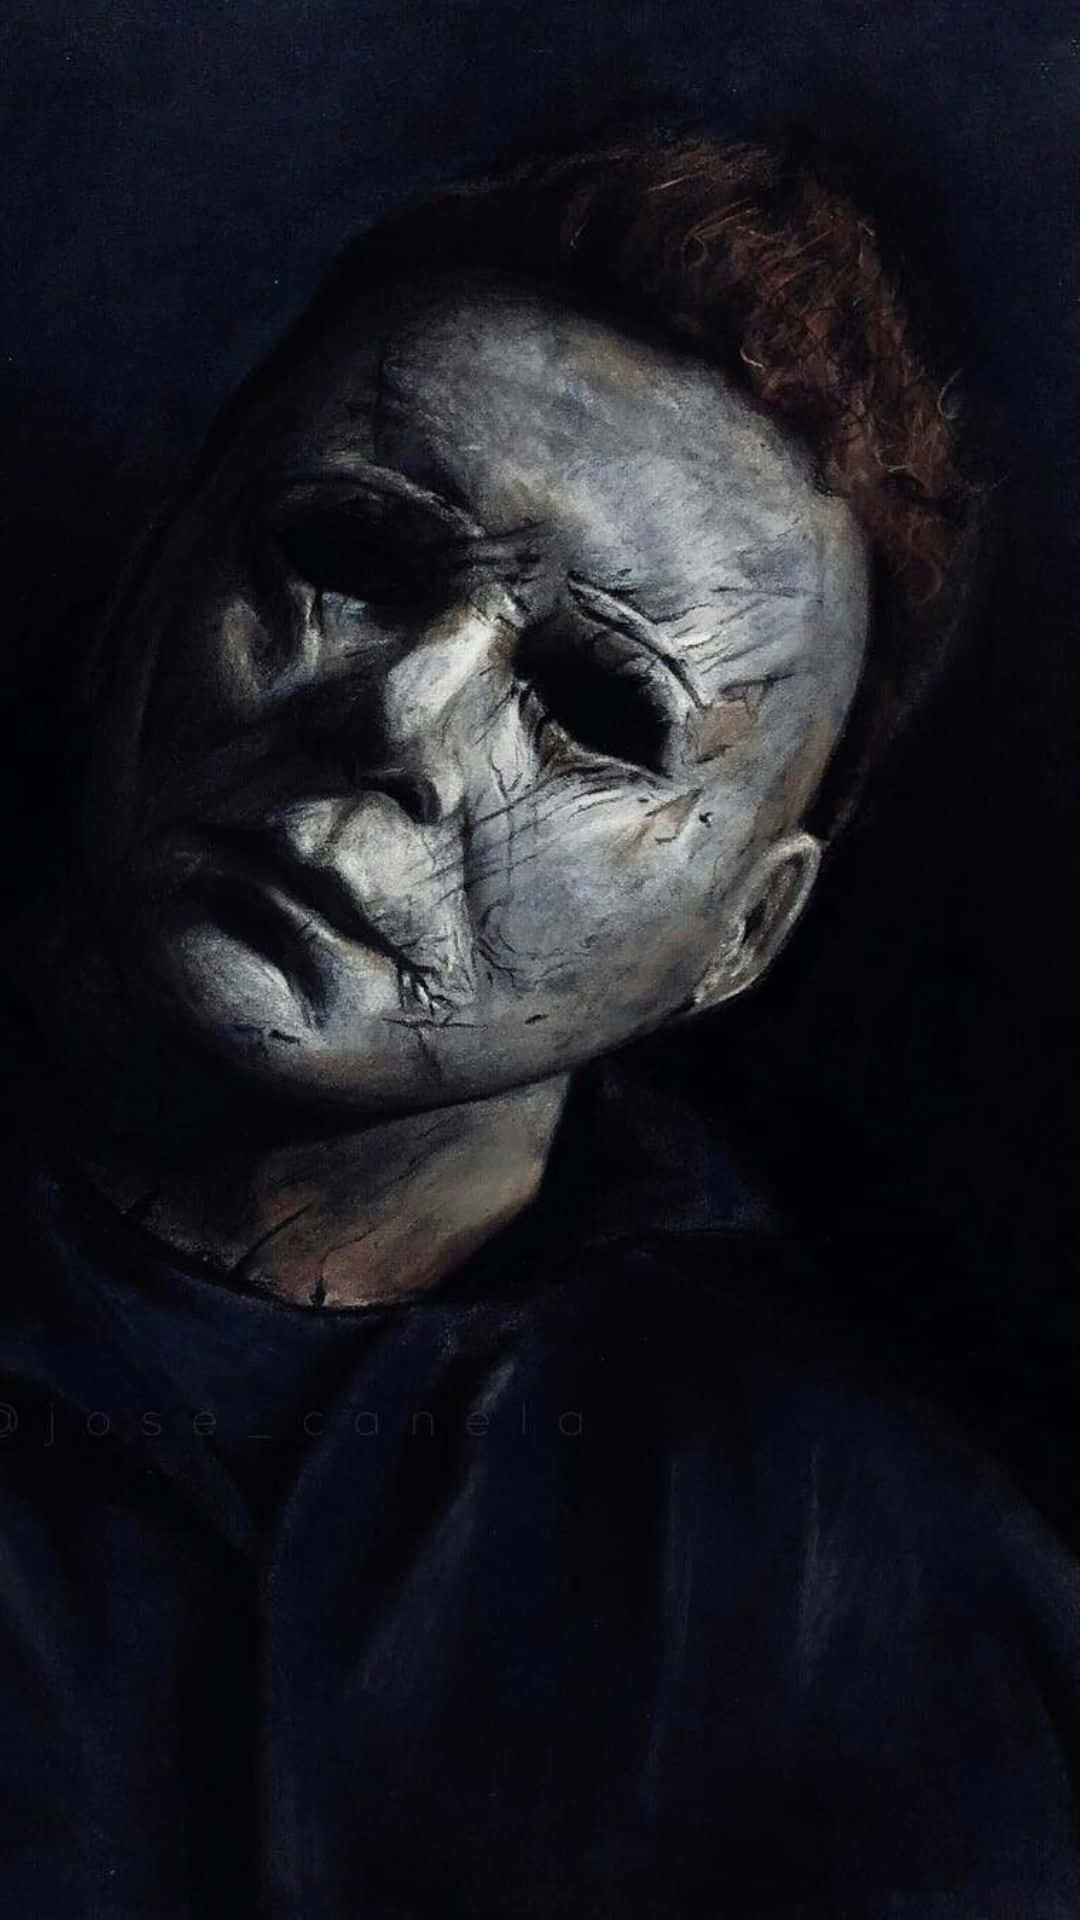 The Iconic Killer Michael Myers, Star of Halloween